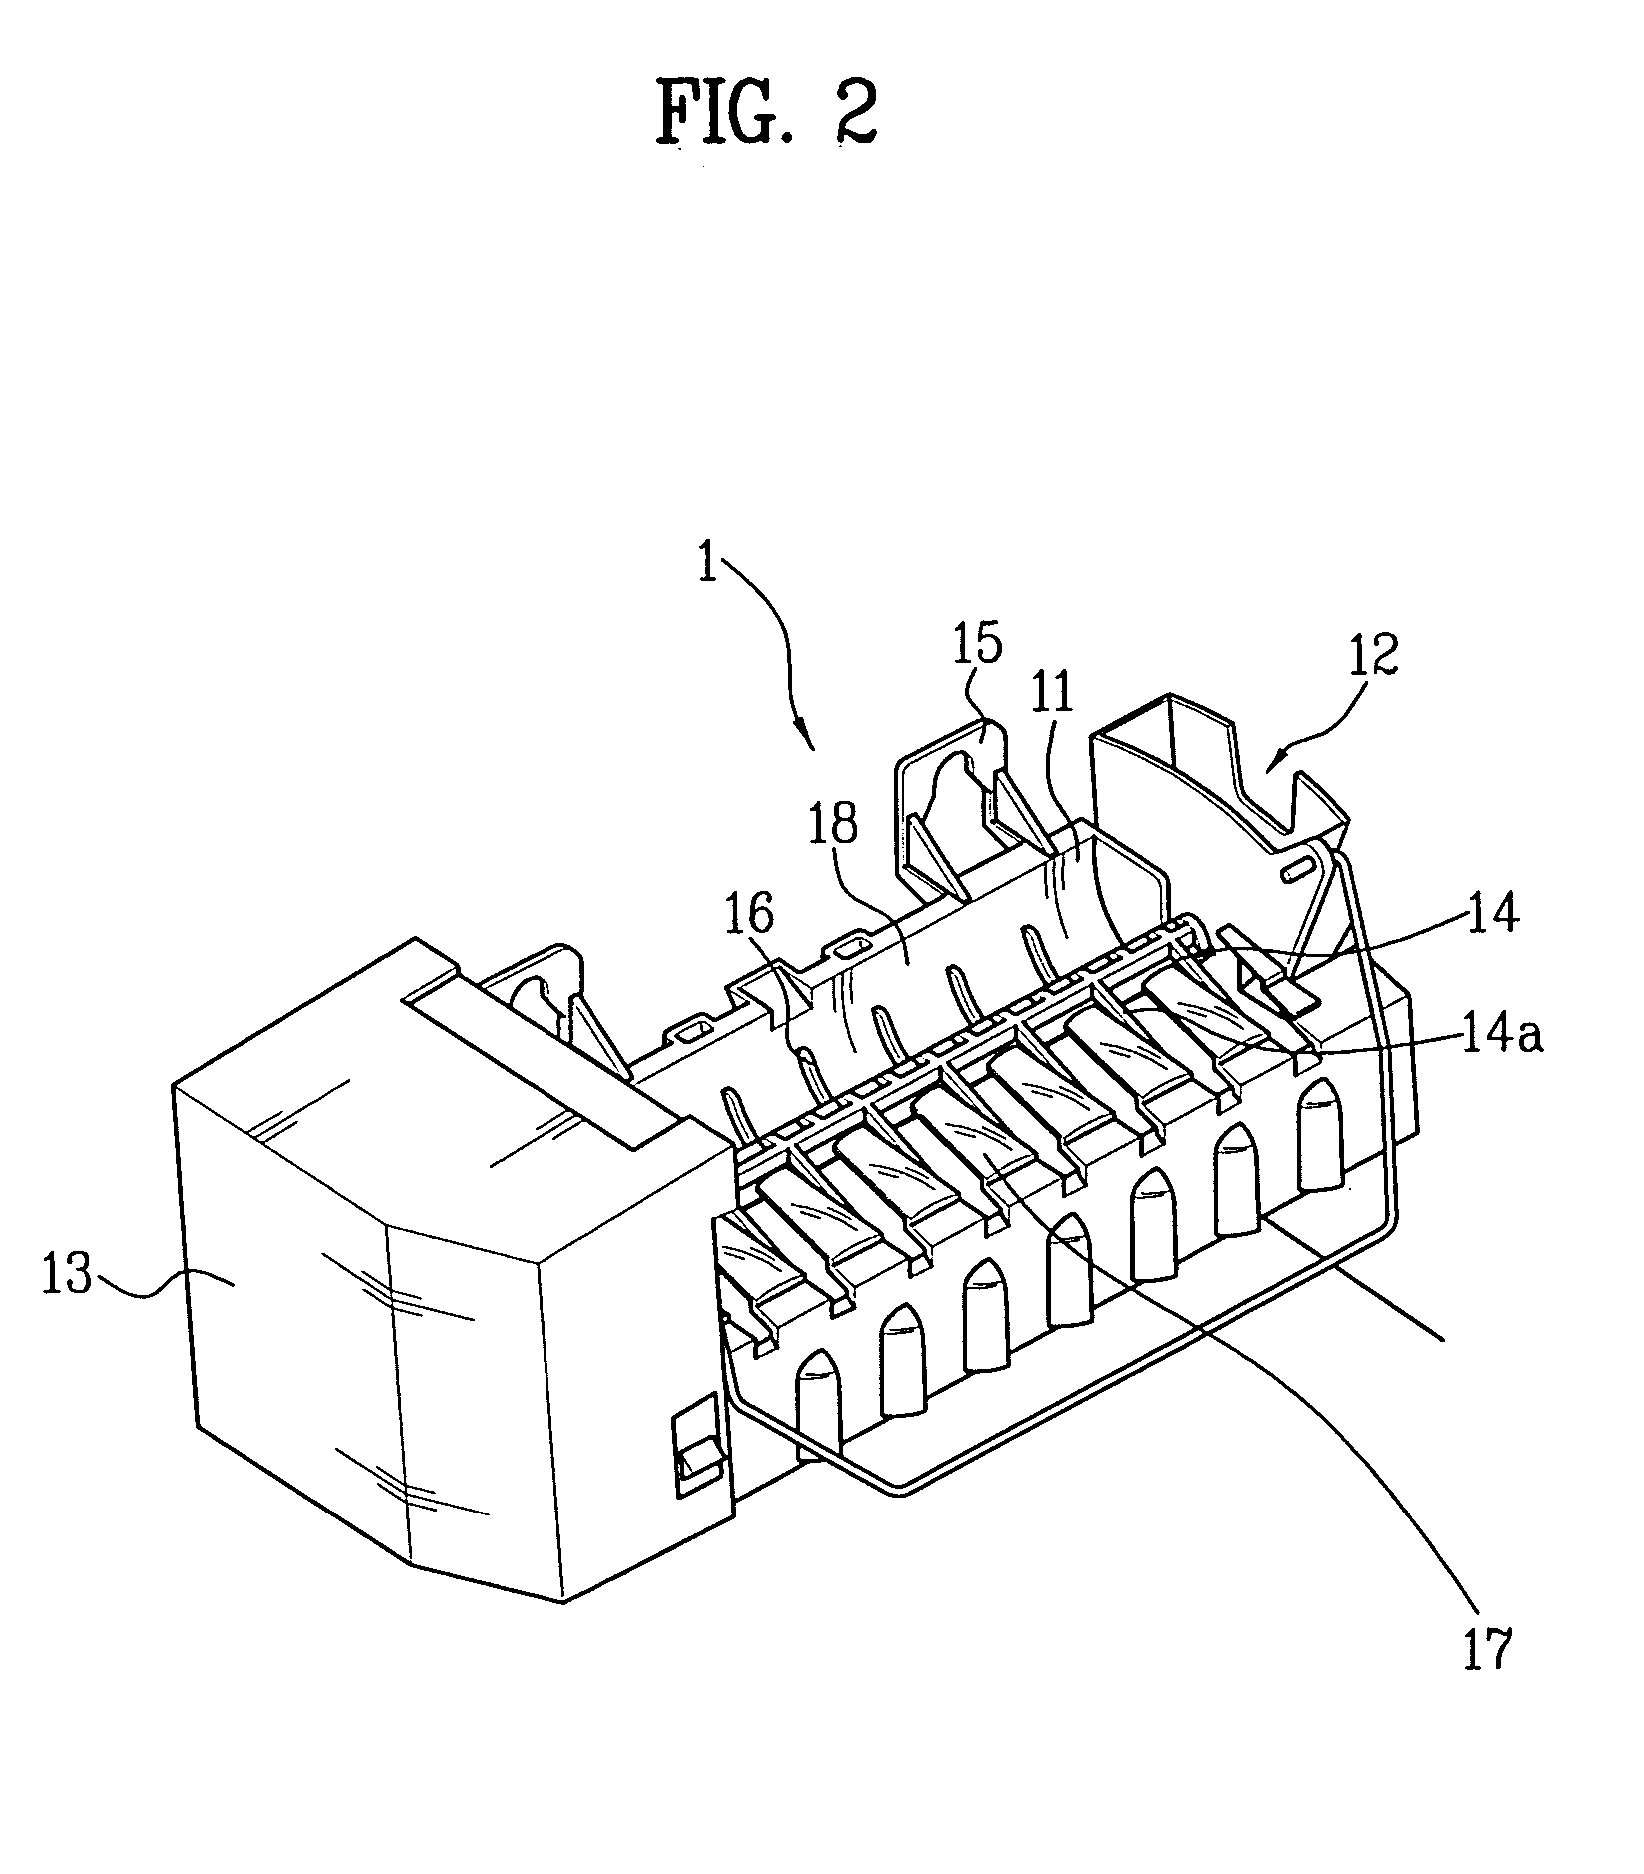 Ice bank of ice-making device for refrigerator